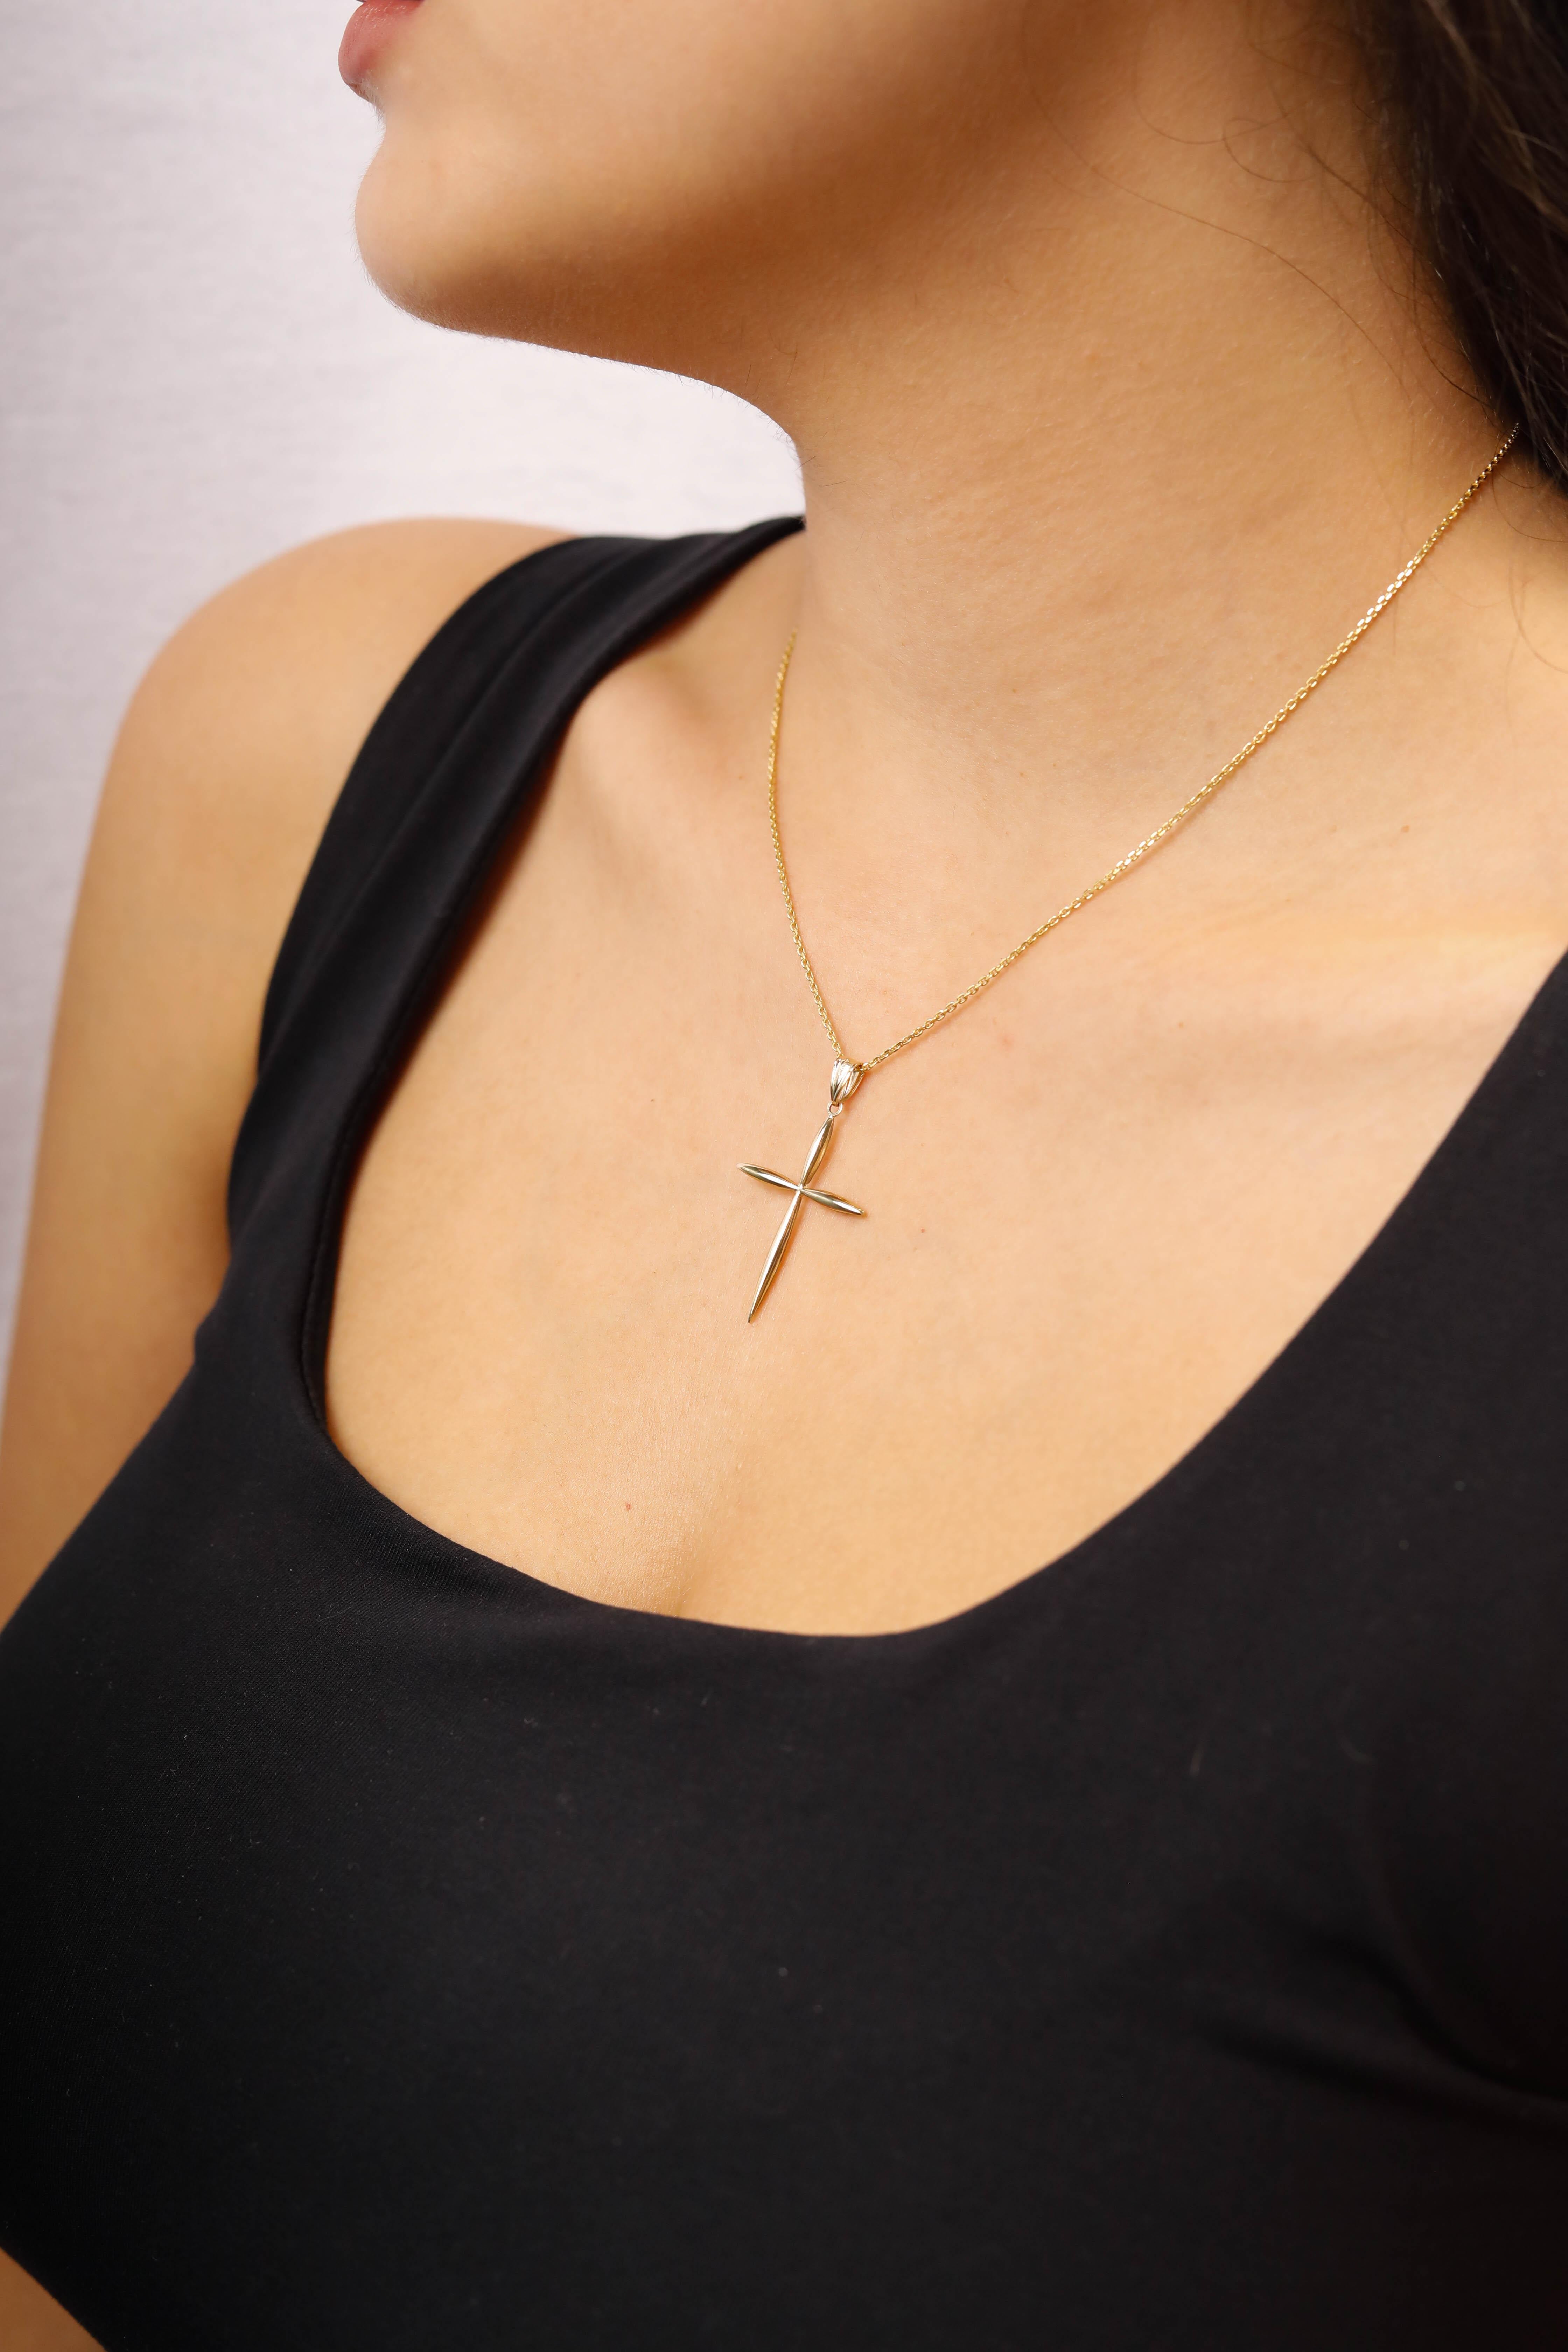 14 Karat Yellow Gold Slim Modern Cross Pendant Christmas GIft

These delicate cross pendants are crafted in solid 14 karats yellow gold. Modeled after traditional jewelry, these pendants are with cross Design take on the classic gold